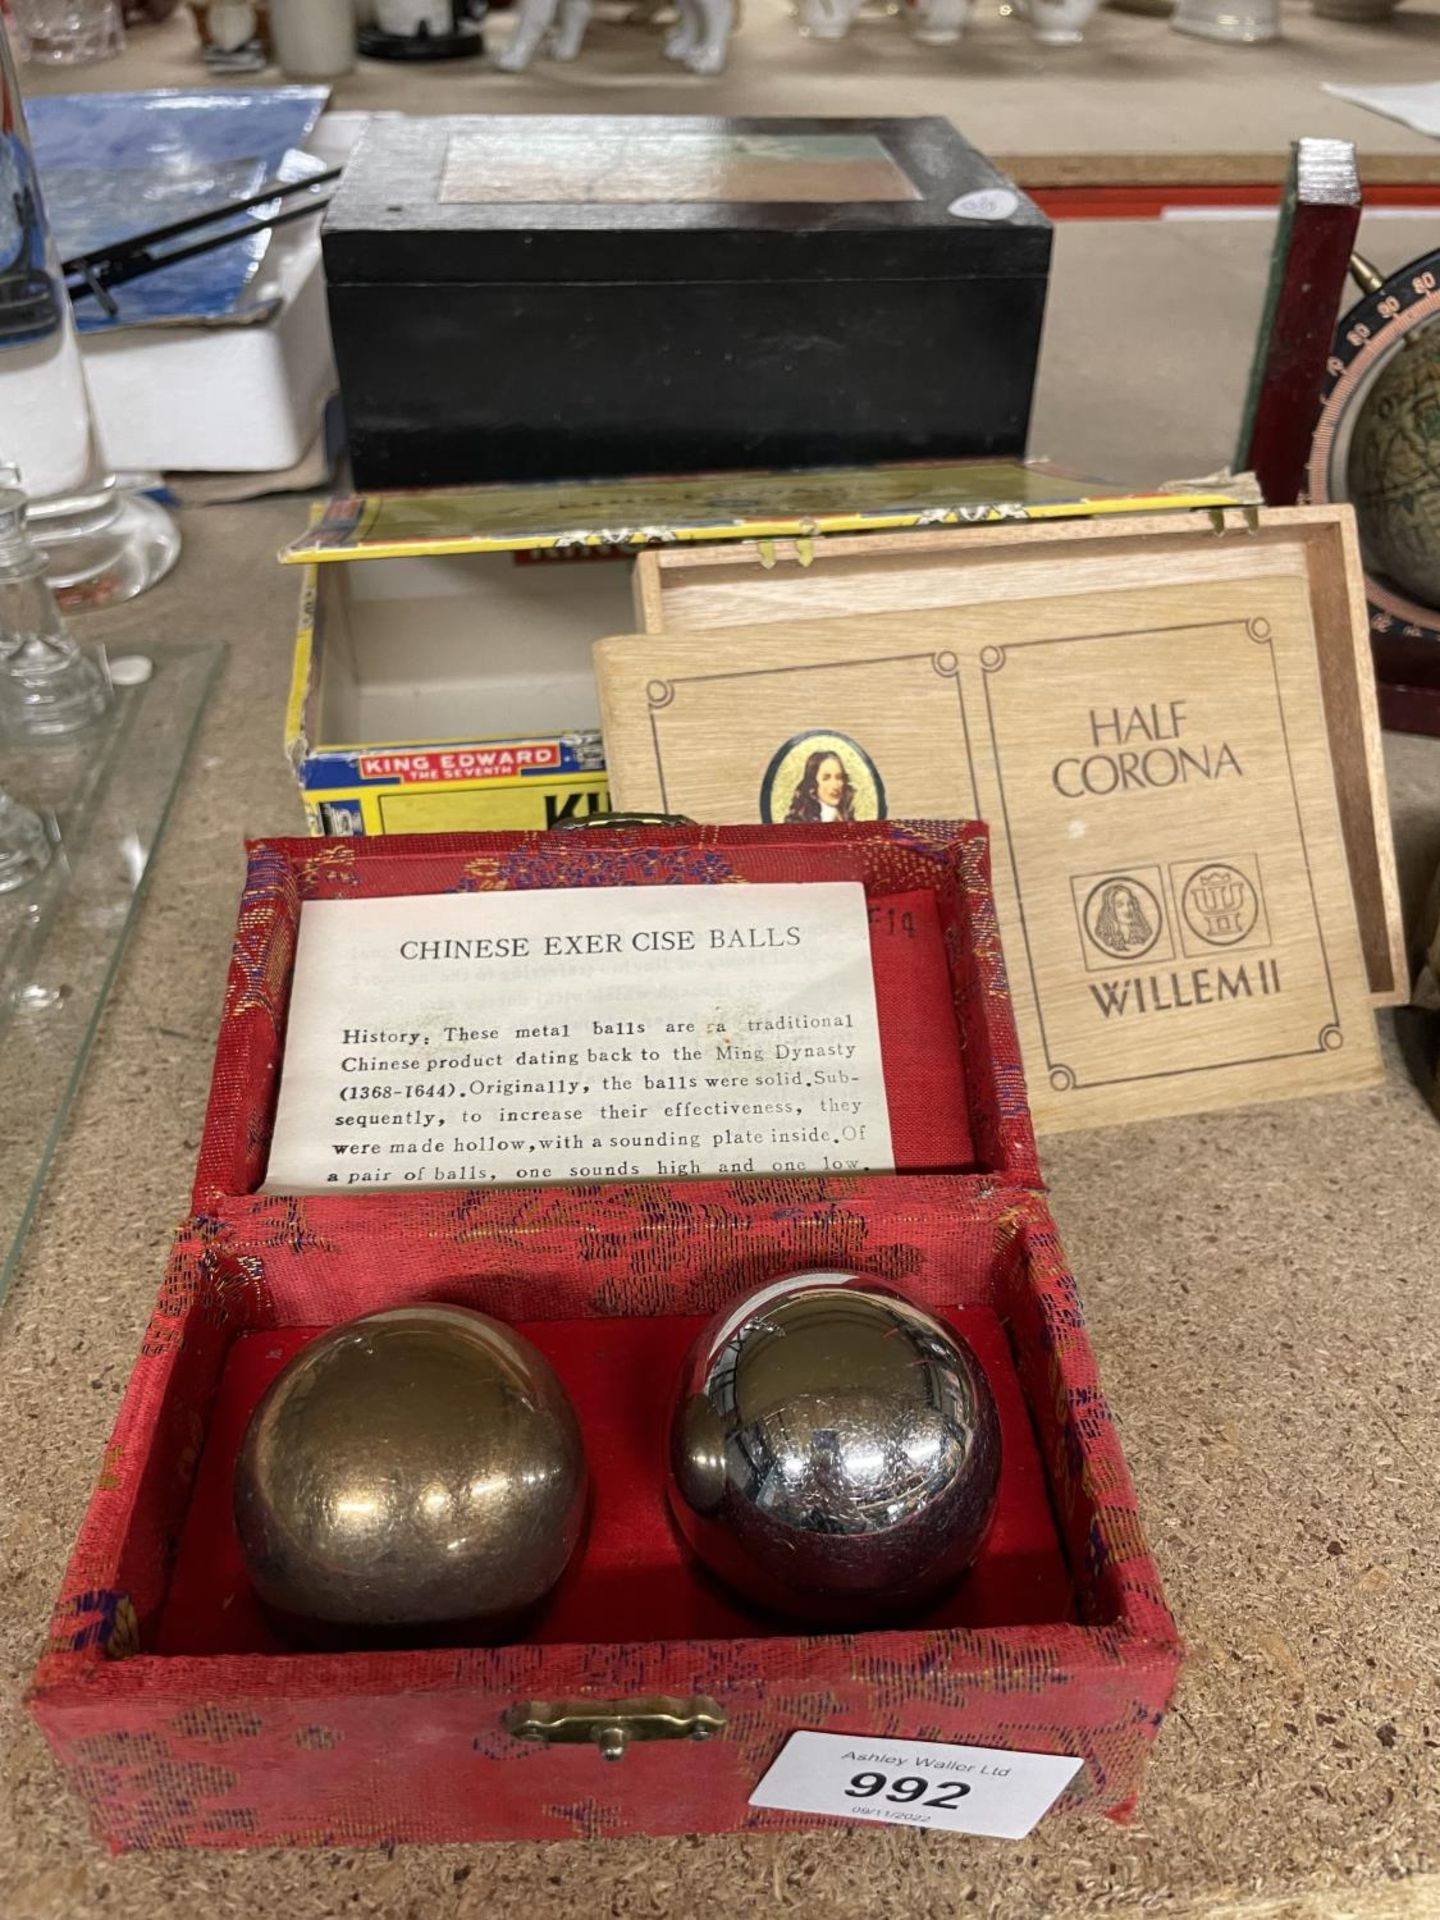 A GLASS CHESS SET WITH BOX, CHINESE EXERCISE BOWLS, WOODEN BOX, GALLILEO THERMOMETER, VINTAGE KING - Image 3 of 12